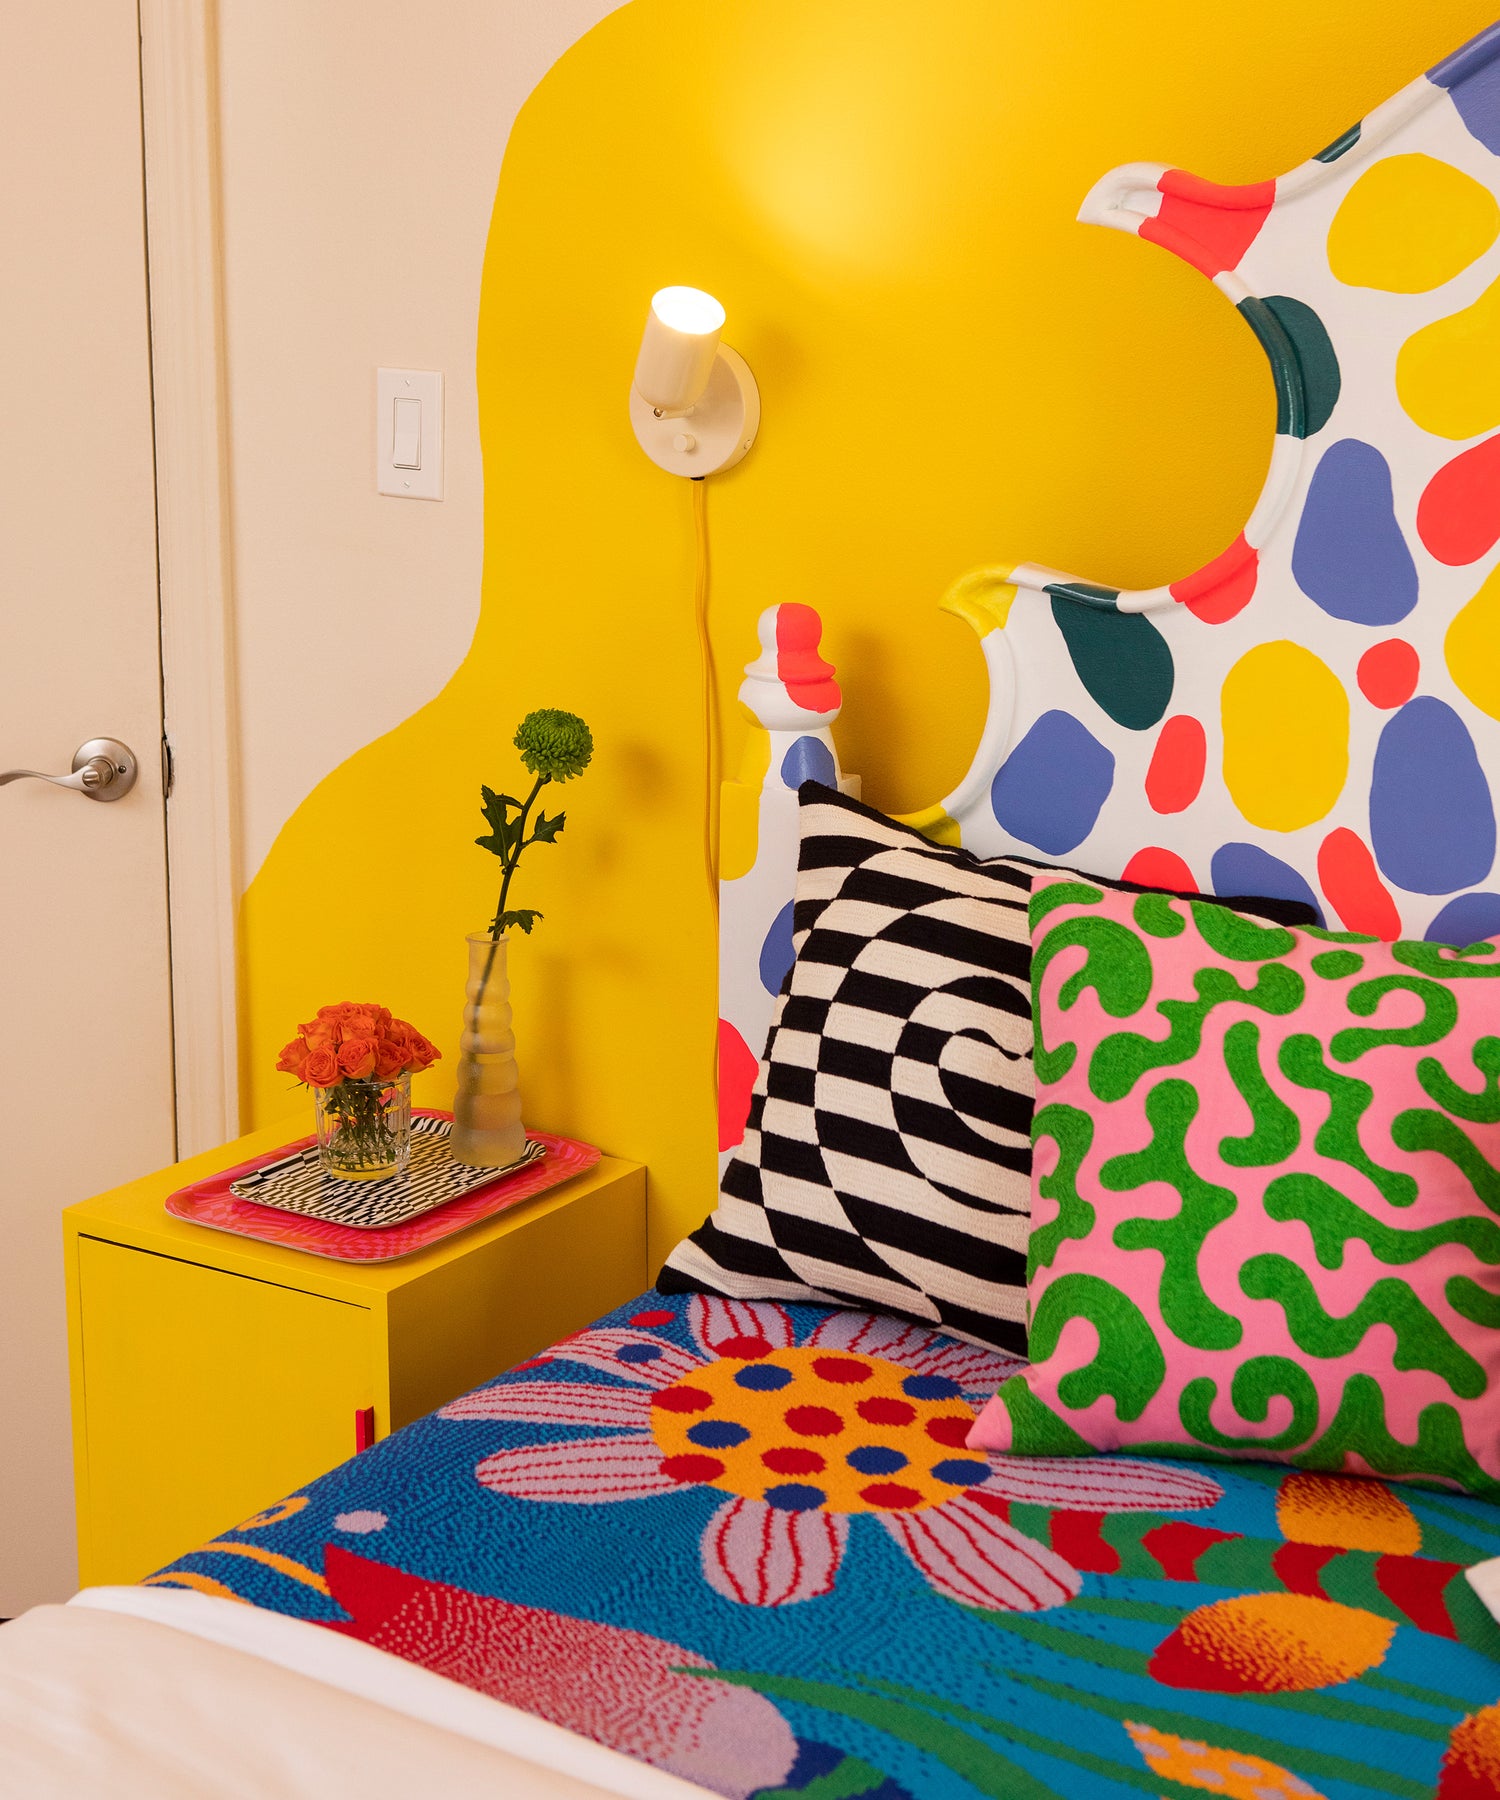 Image of a bed made with the Best Buds Blanket in a colorful bedroom. On top of the blanket sits the Dazzle and Silly Squiggles Pillow Covers.